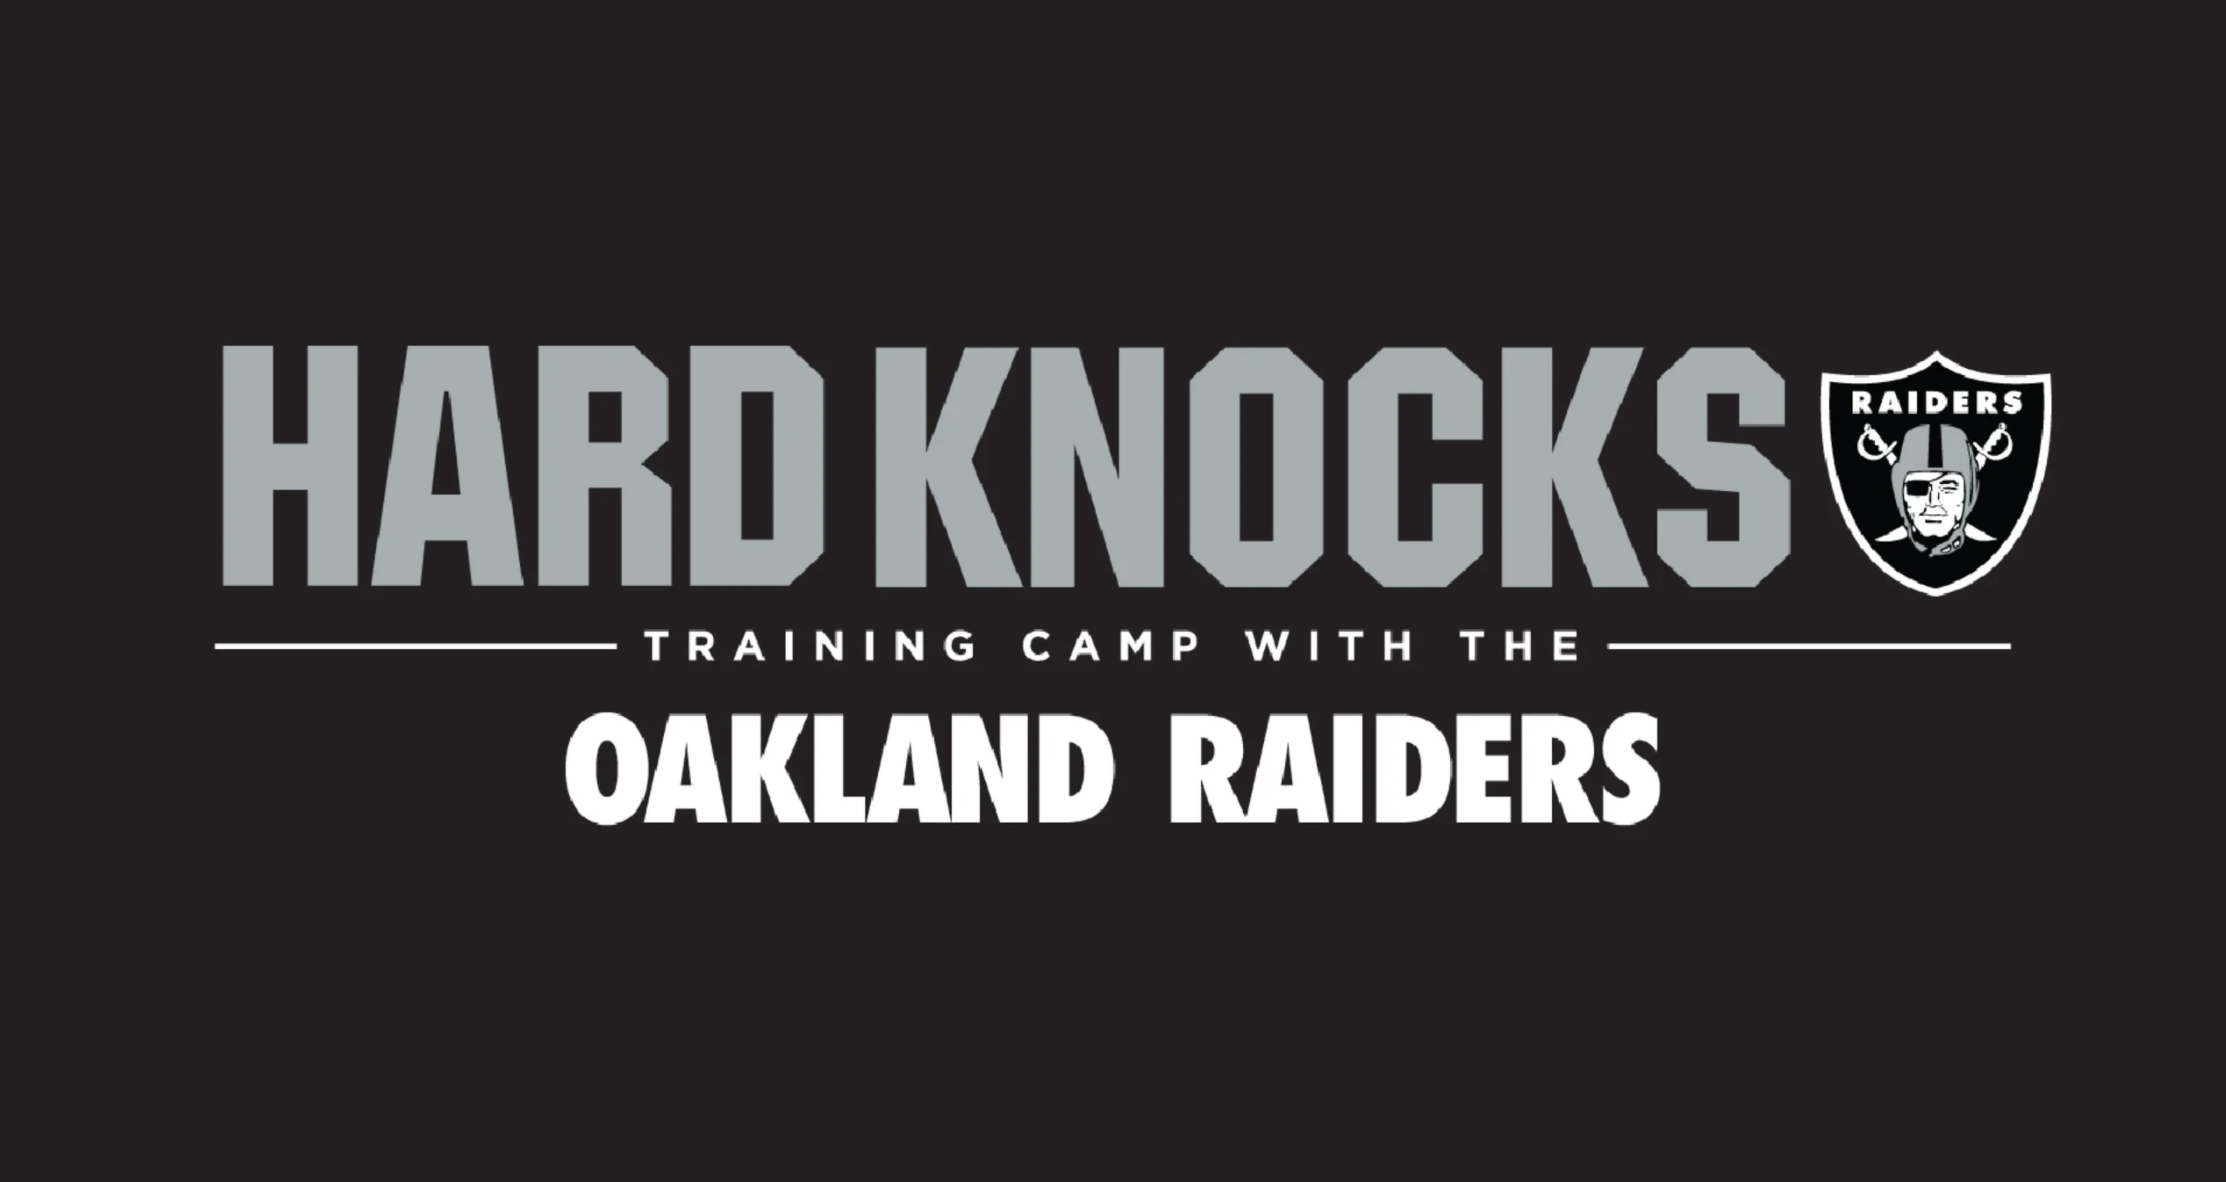 NFL, HBO Announce Raiders For 2019 Season Of 